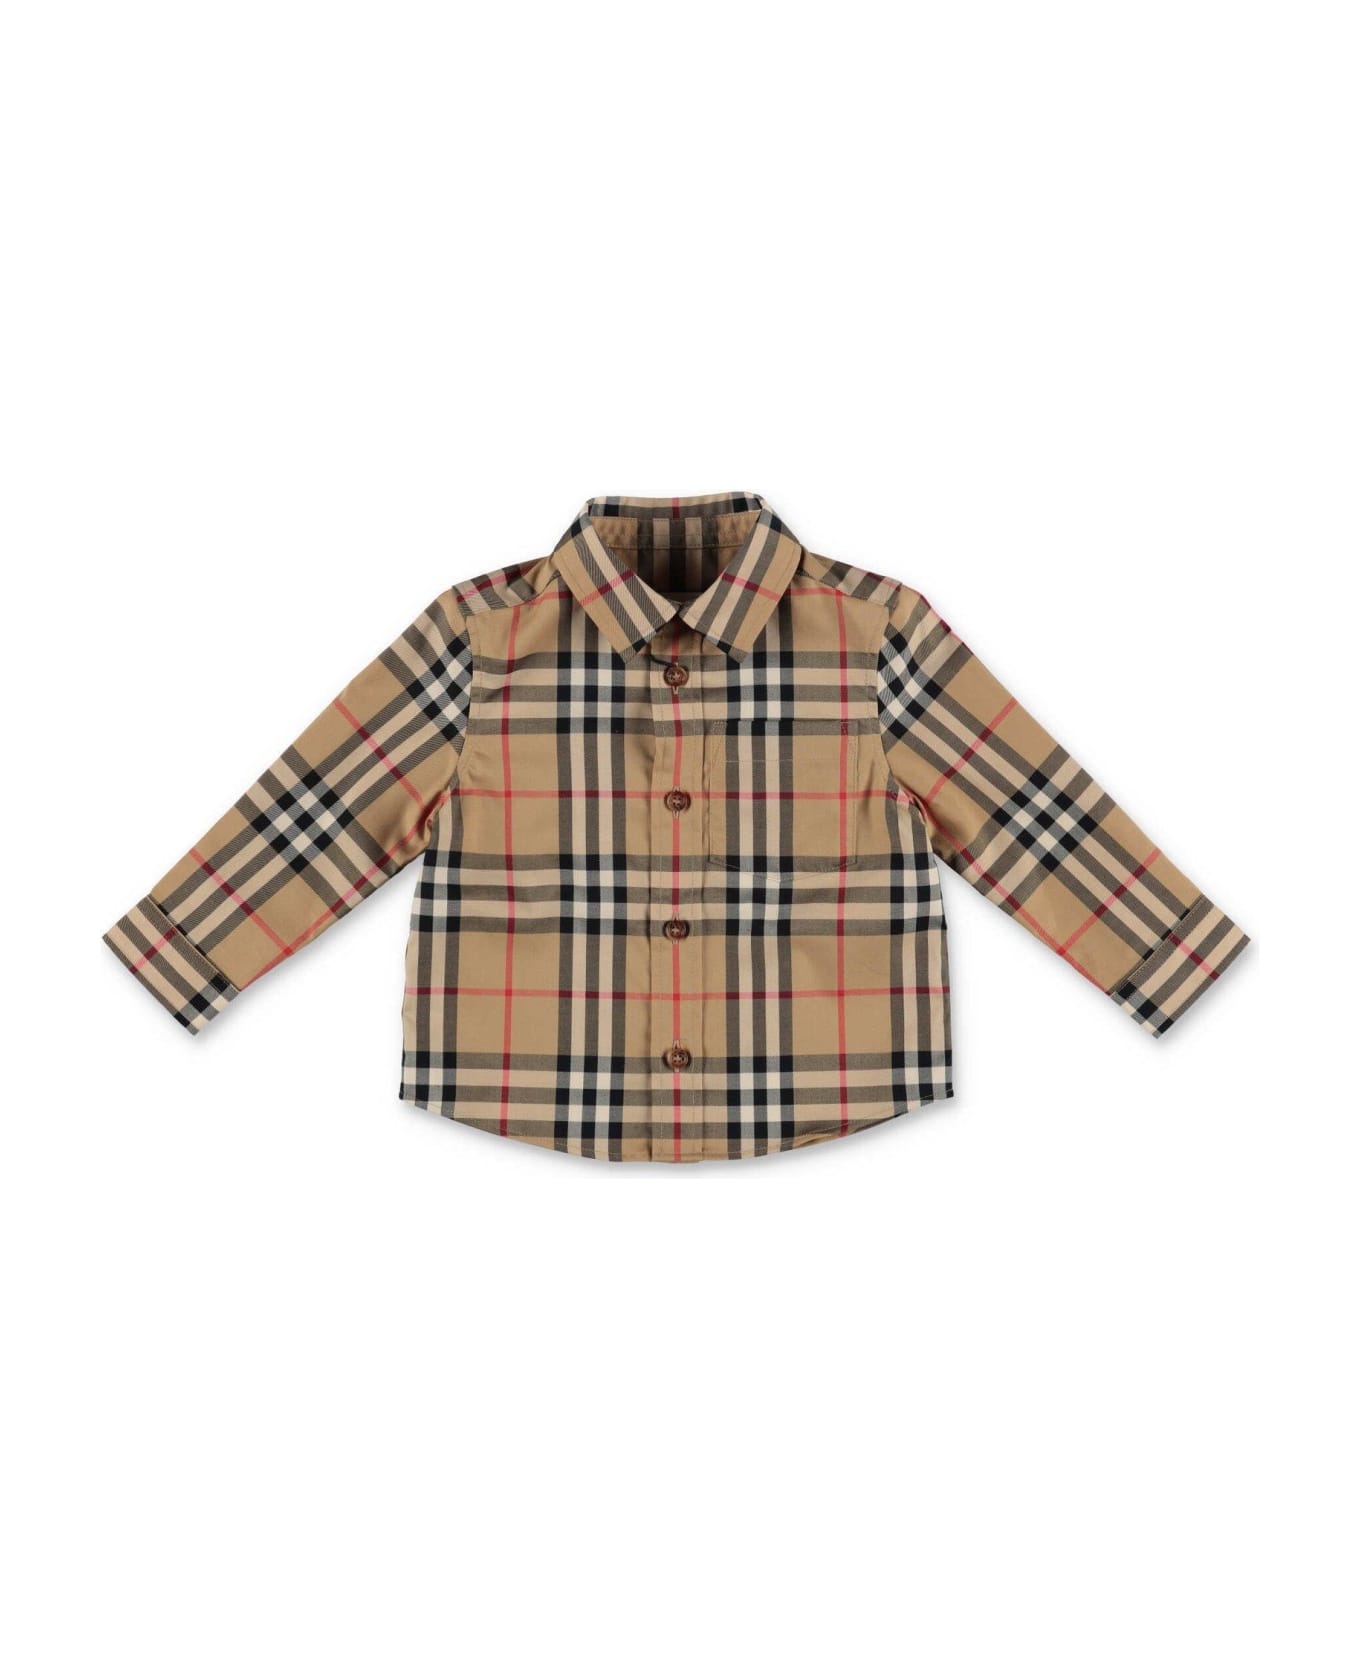 Burberry Checked Long-sleeved Shirt - Archive beige ip chk シャツ